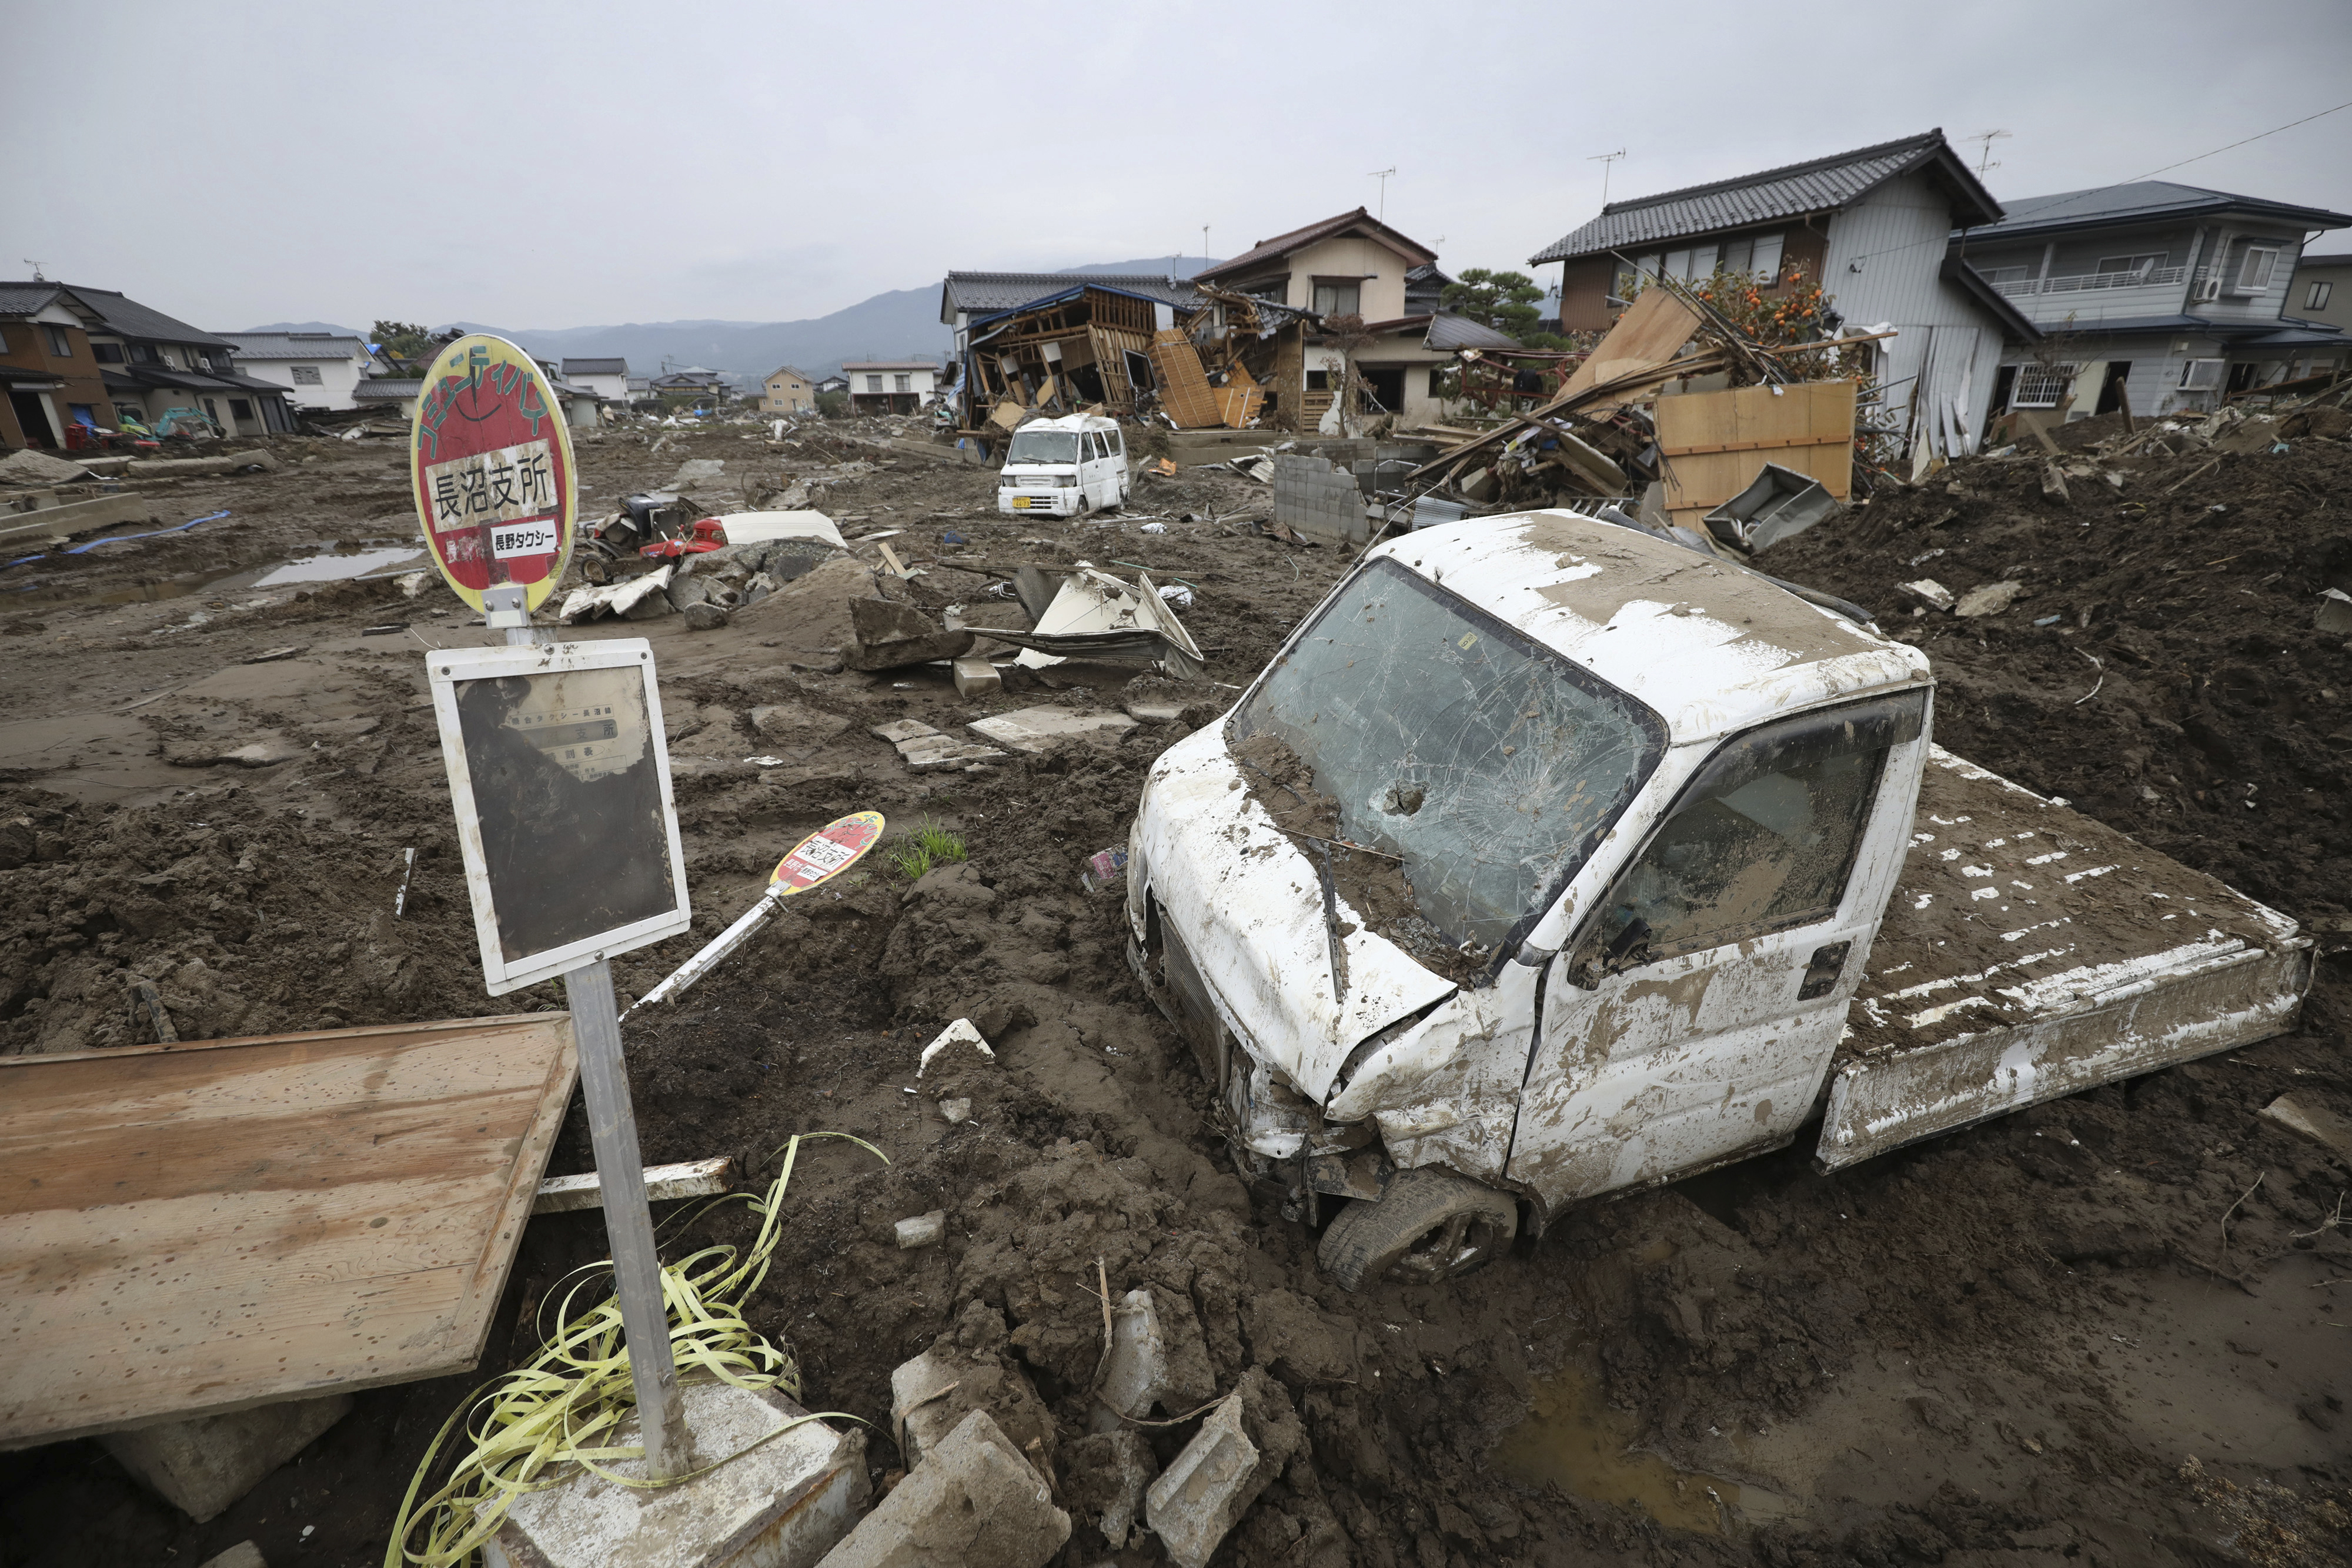 Second year of record tropical cyclone losses in Japan